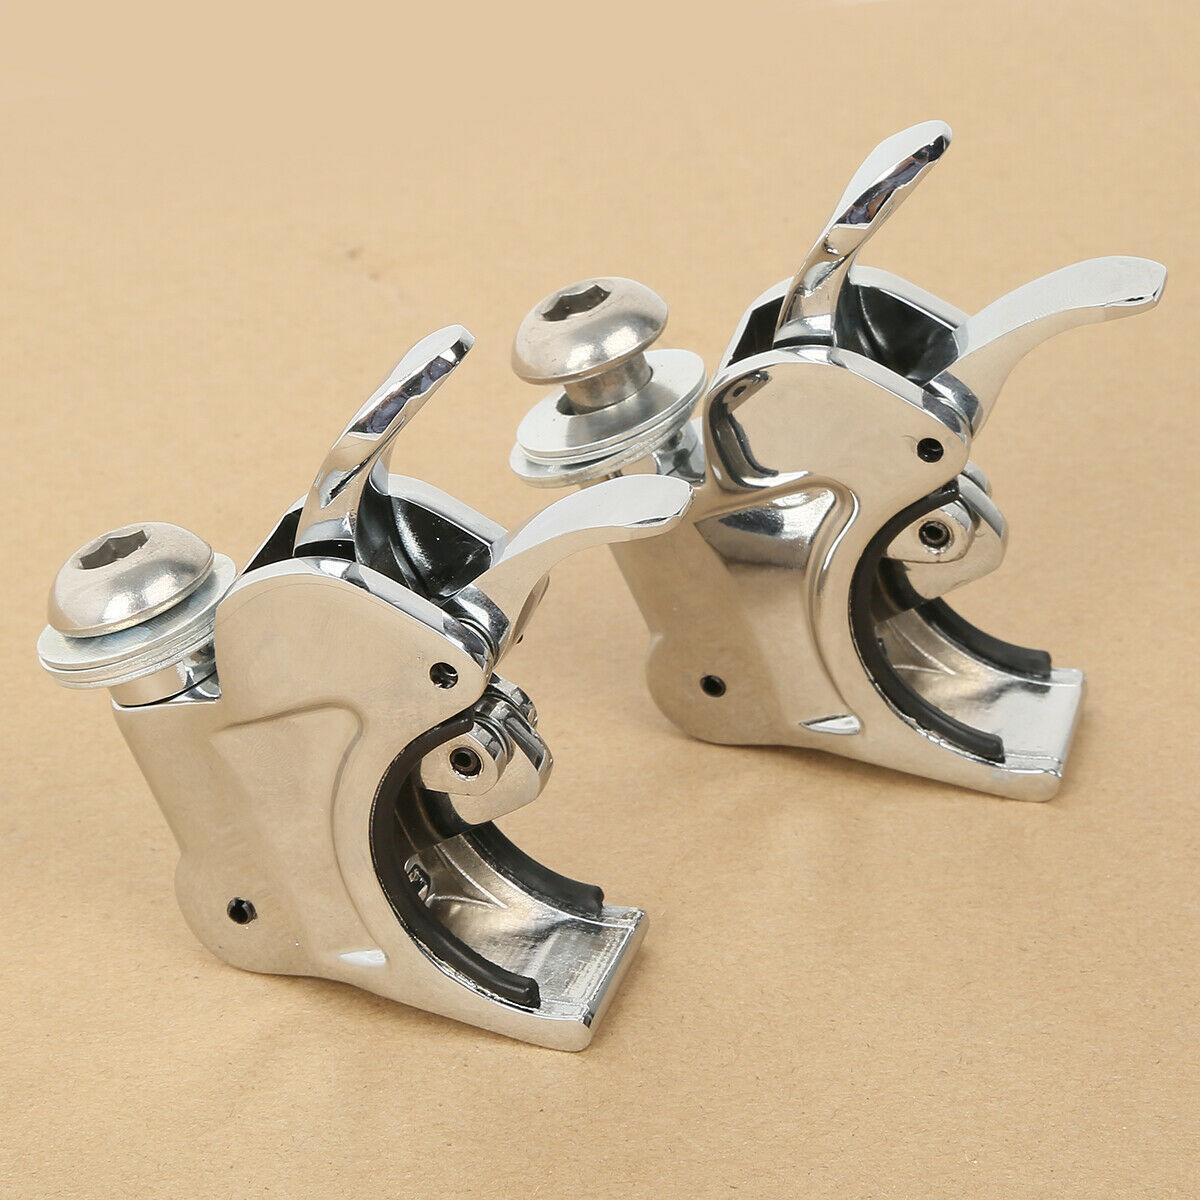 41mm Windshield Clamps Fit For Harley Softail Night Train FXS FXST FXSTB 88-13 - Moto Life Products